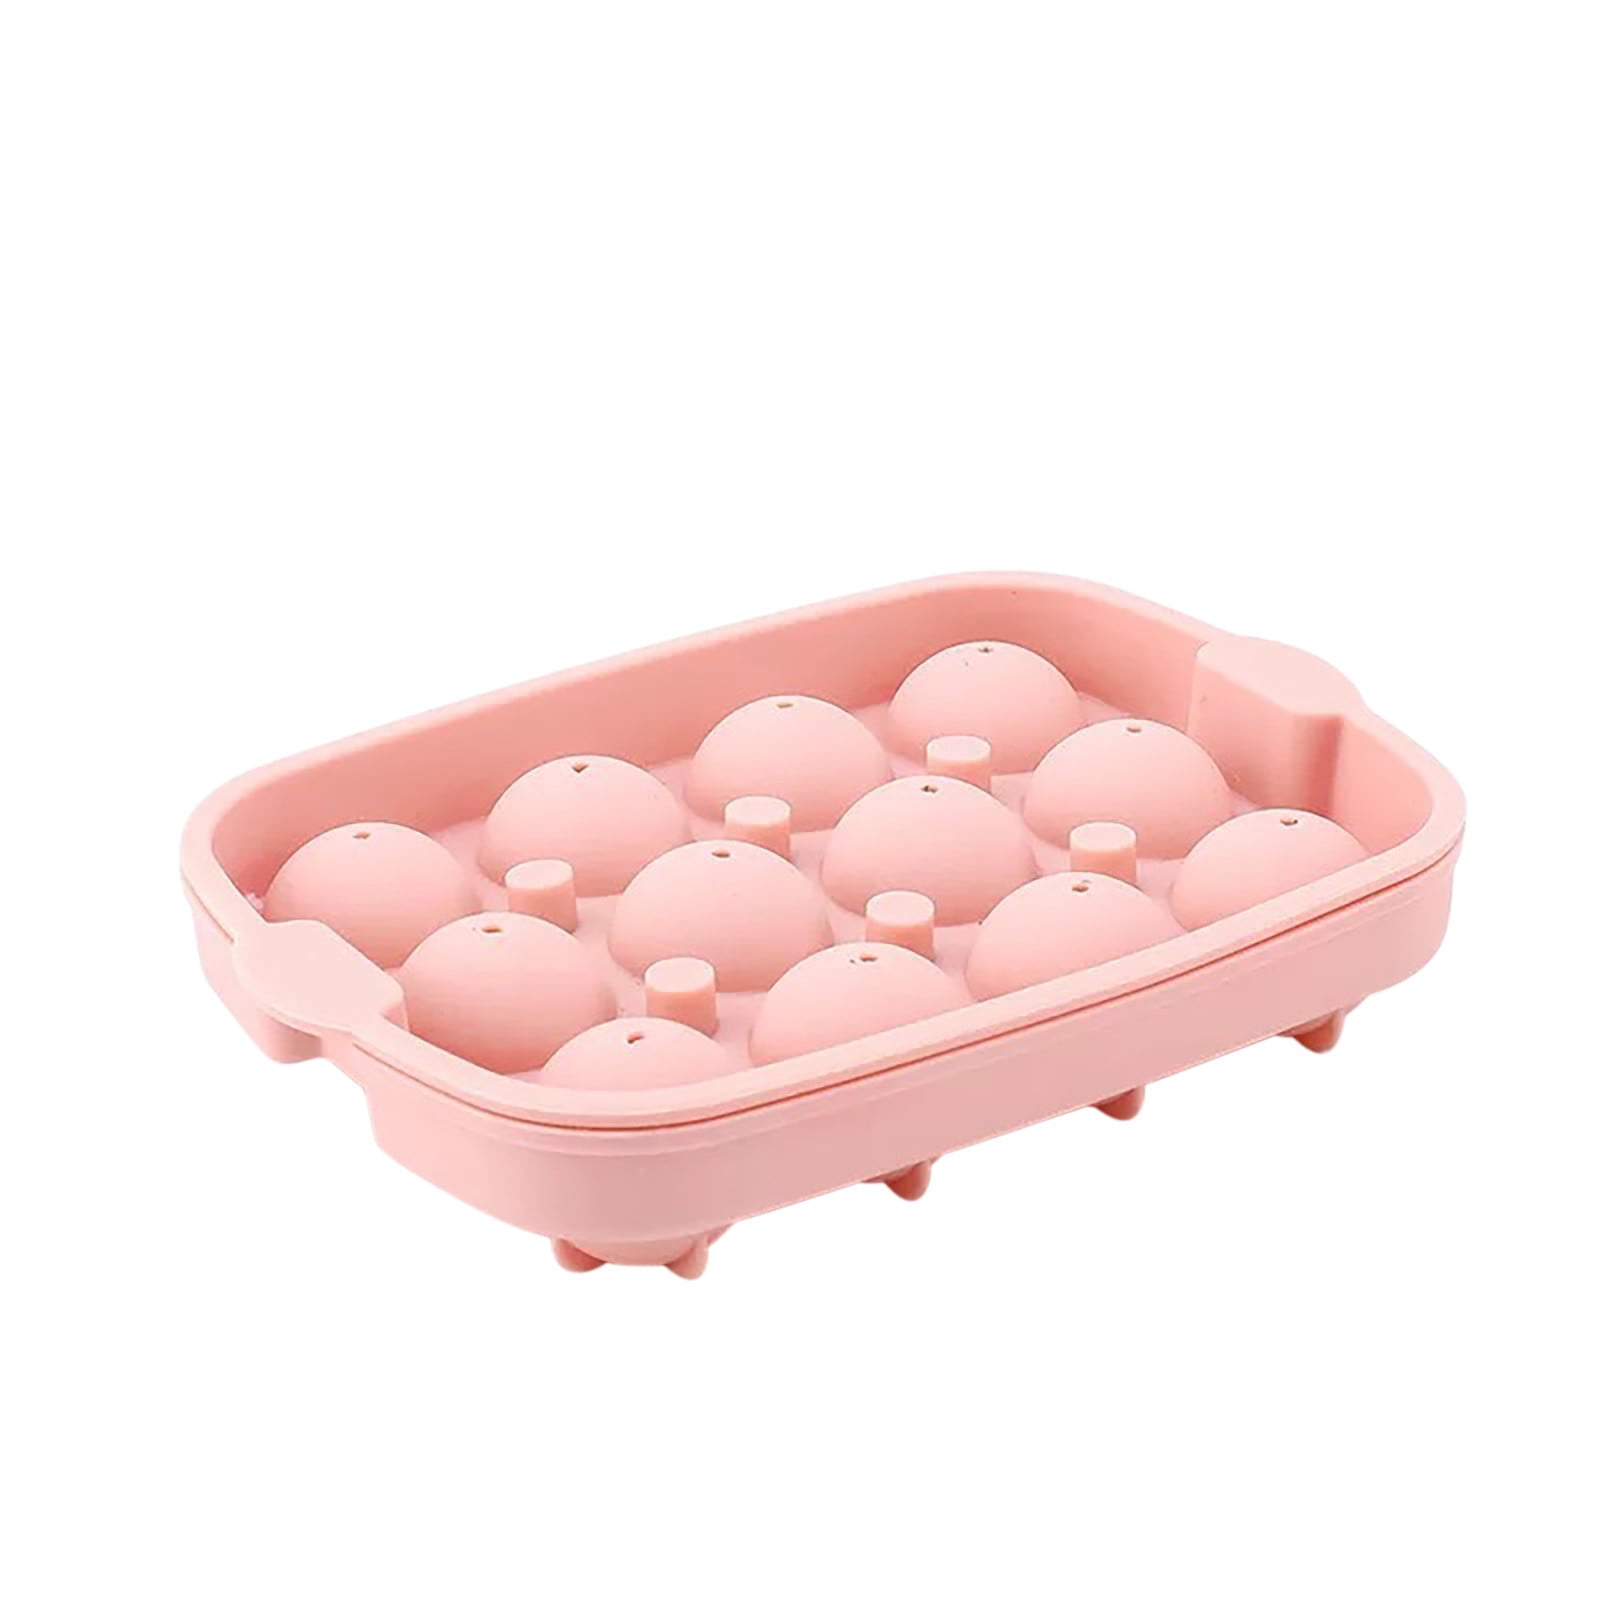 Mimapac The Ultimate Mini Ice Cube Maker Pink Silicone Bucket Ice Mold and Storage Bin, Portable 2 in 1 Ice Cube Maker, Small Ice Container Makes Frozen Ice